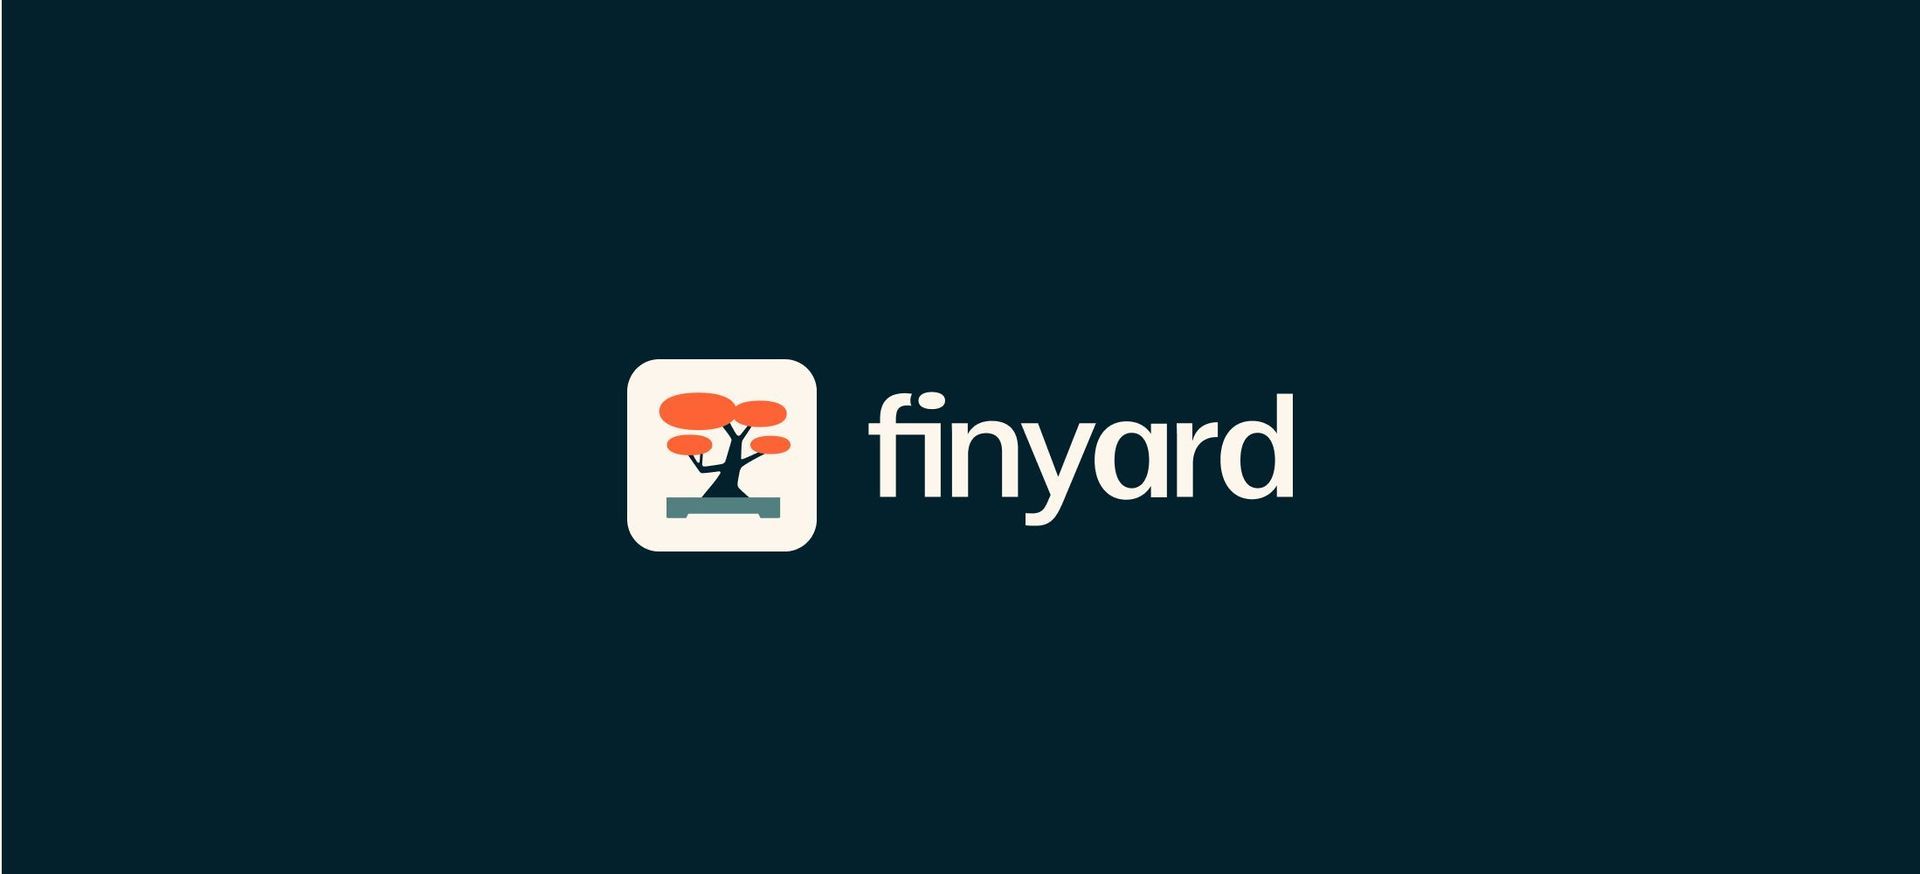 Innovative startup to global FinTech pioneer: The Finyard story